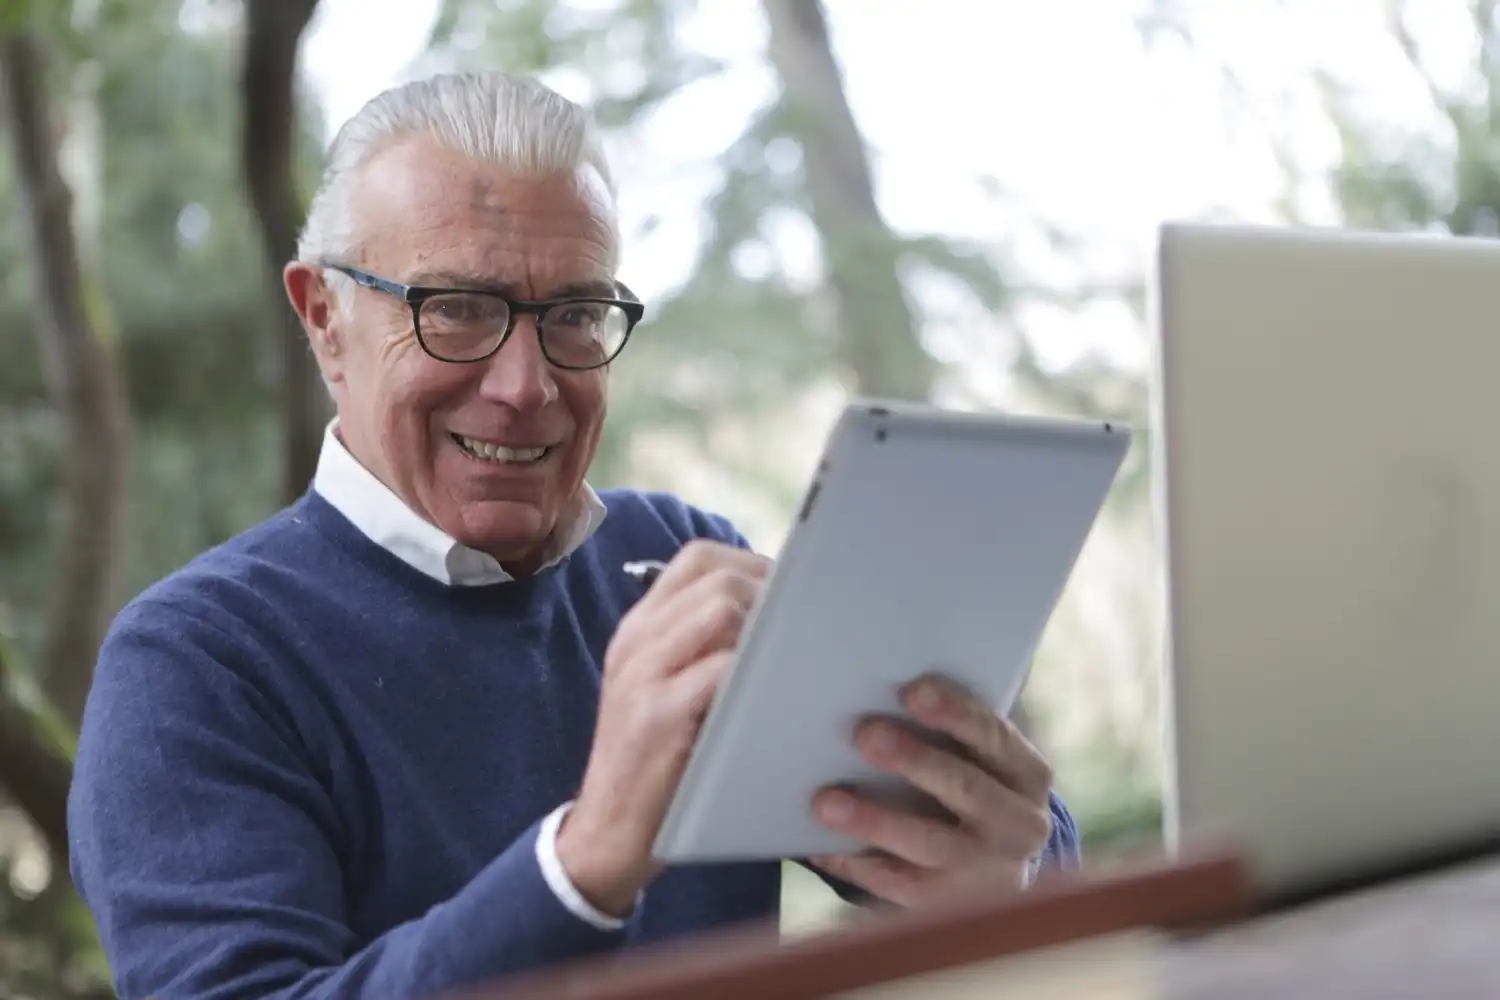 Five Apps and Memory Games to Help Those With Alzheimer’s Disease